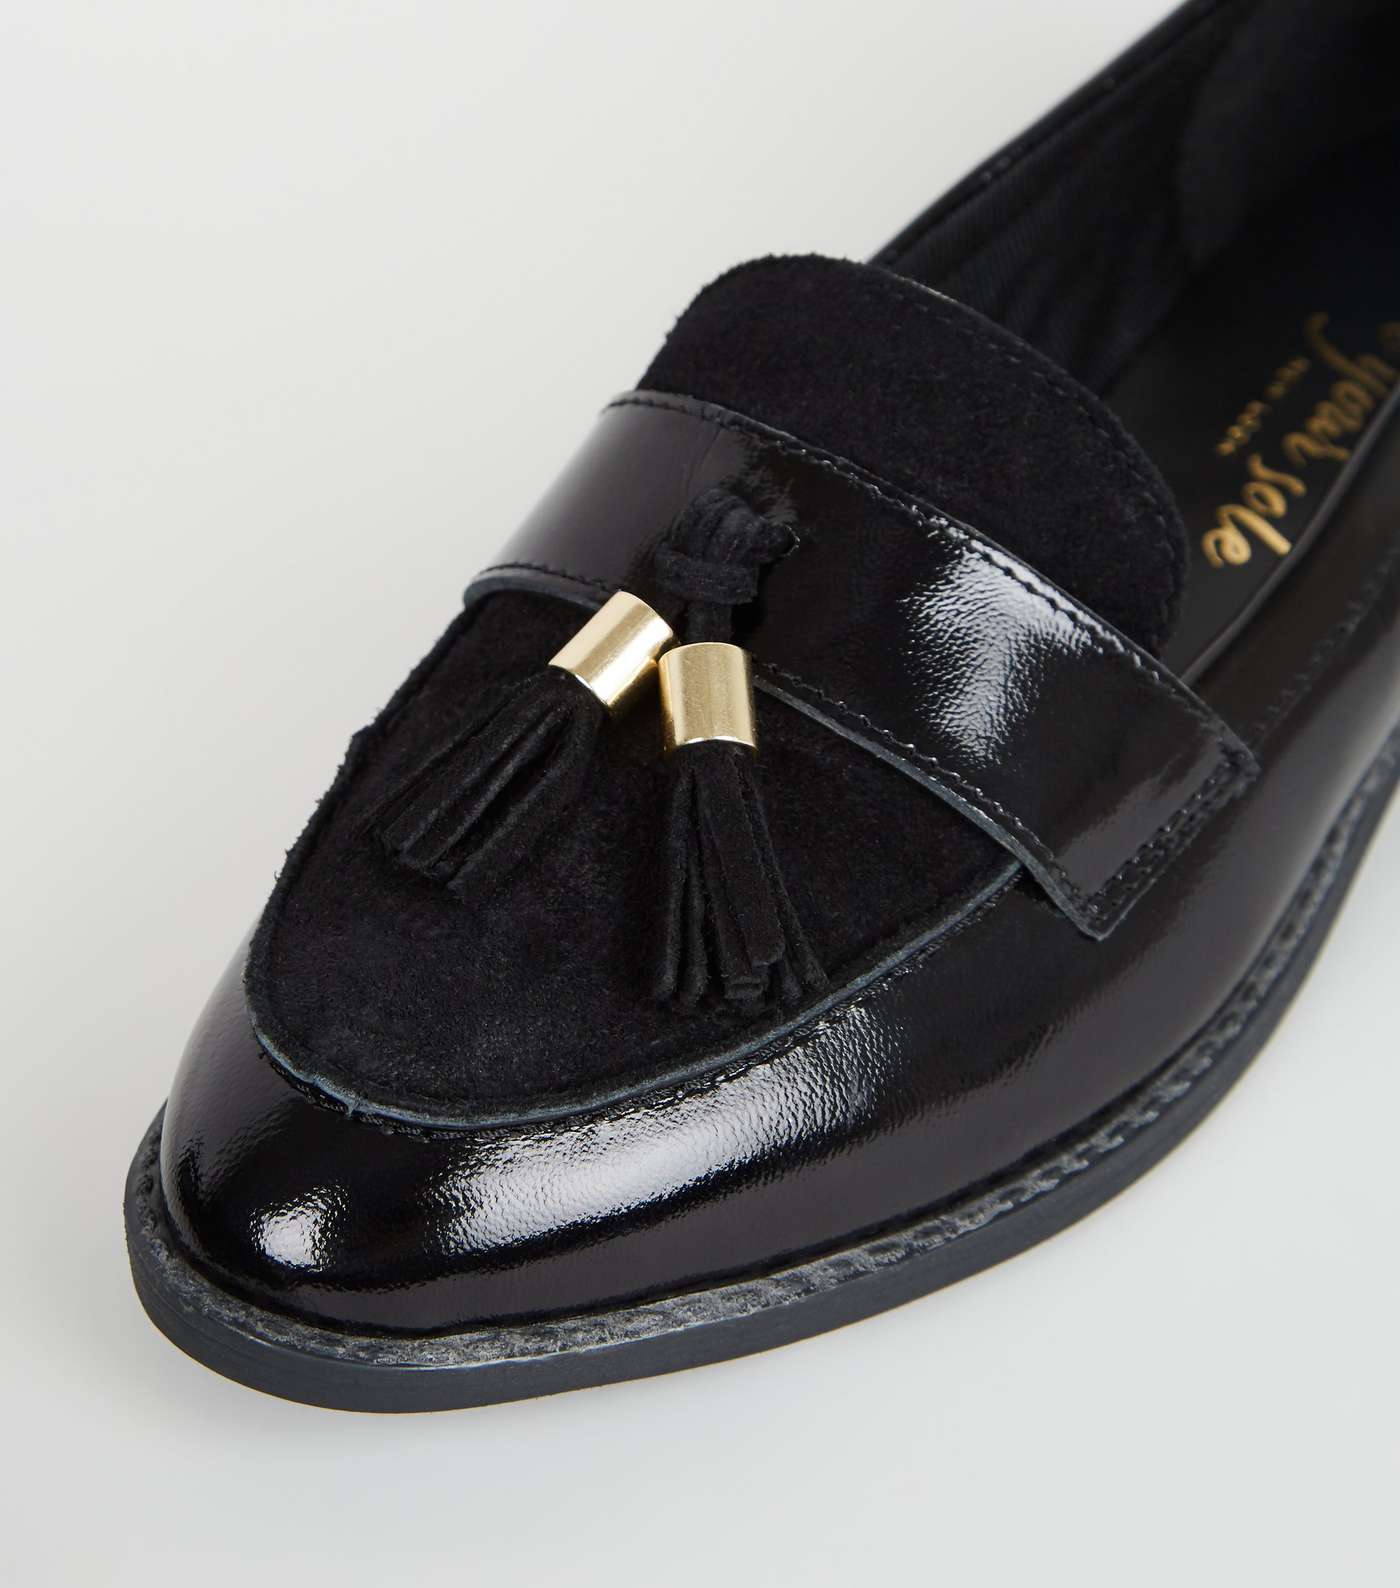 Black Suede and Leather Tassel Trim Loafers Image 4